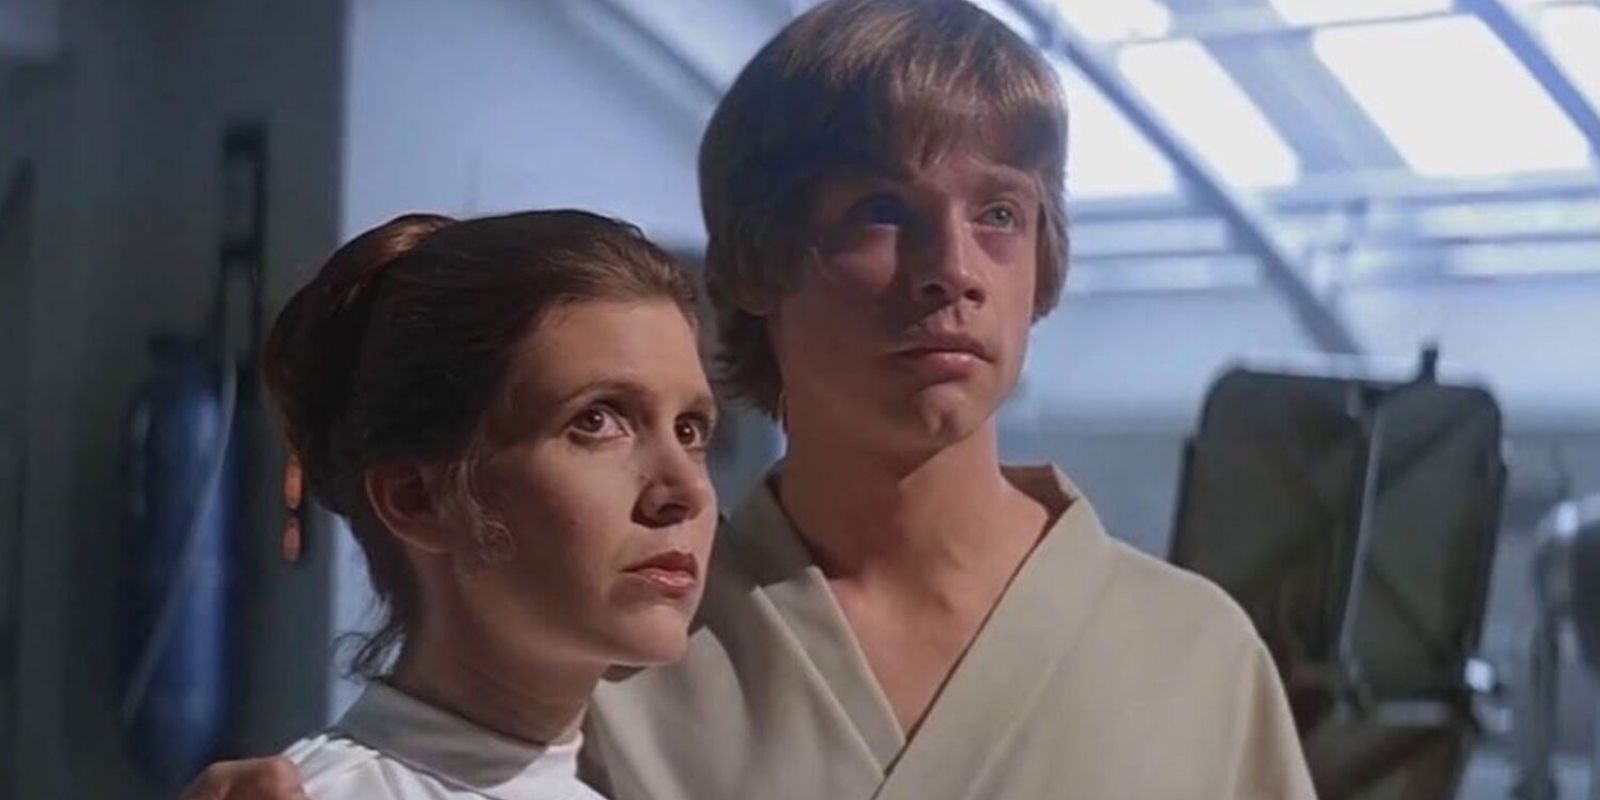 Luke Skywalker and Leia Organa at the end of Star Wars Empire Strikes Back